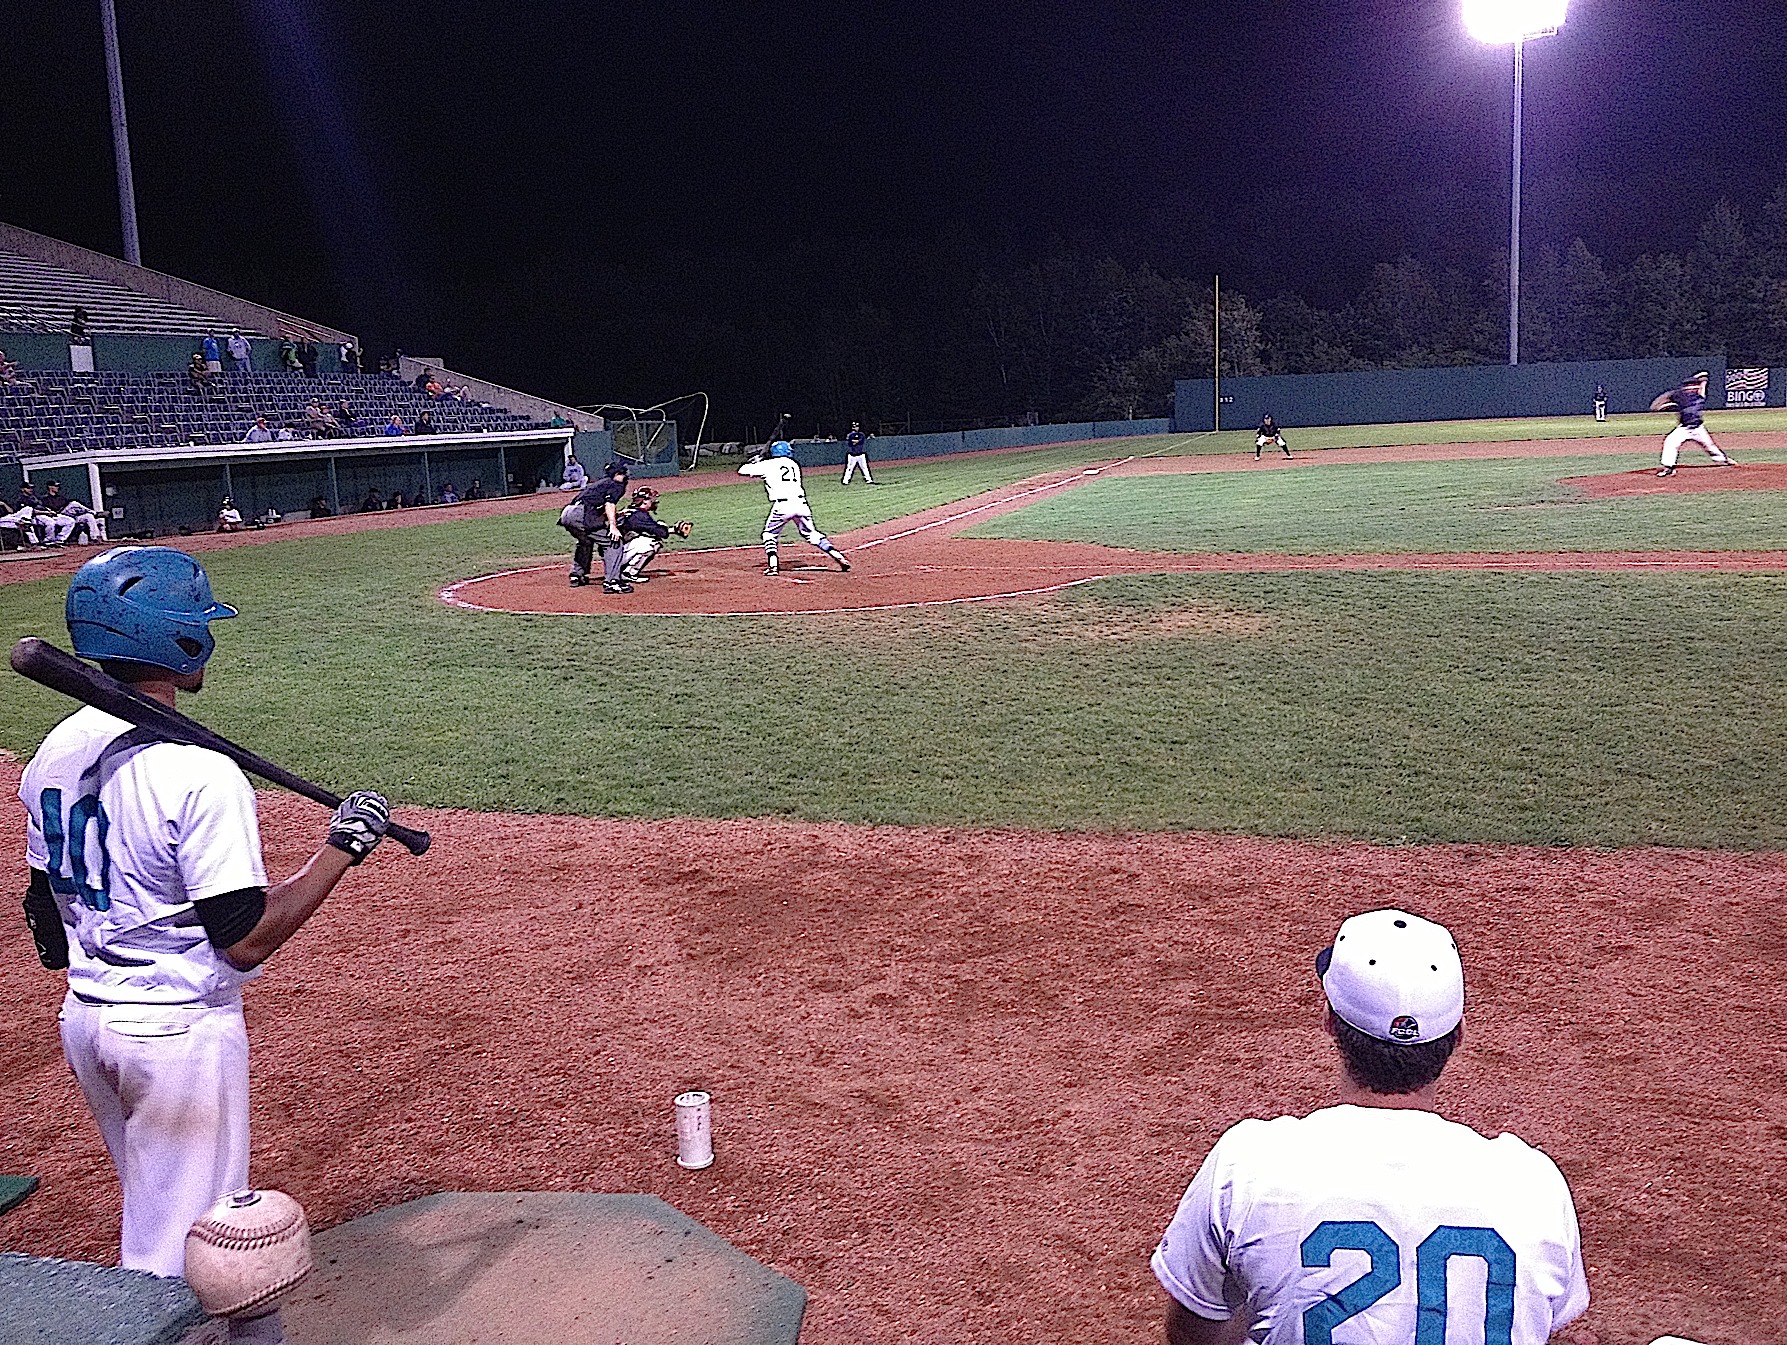 The Old Orchard Beach Raging Tide play in the Futures Collegiate Baseball League.